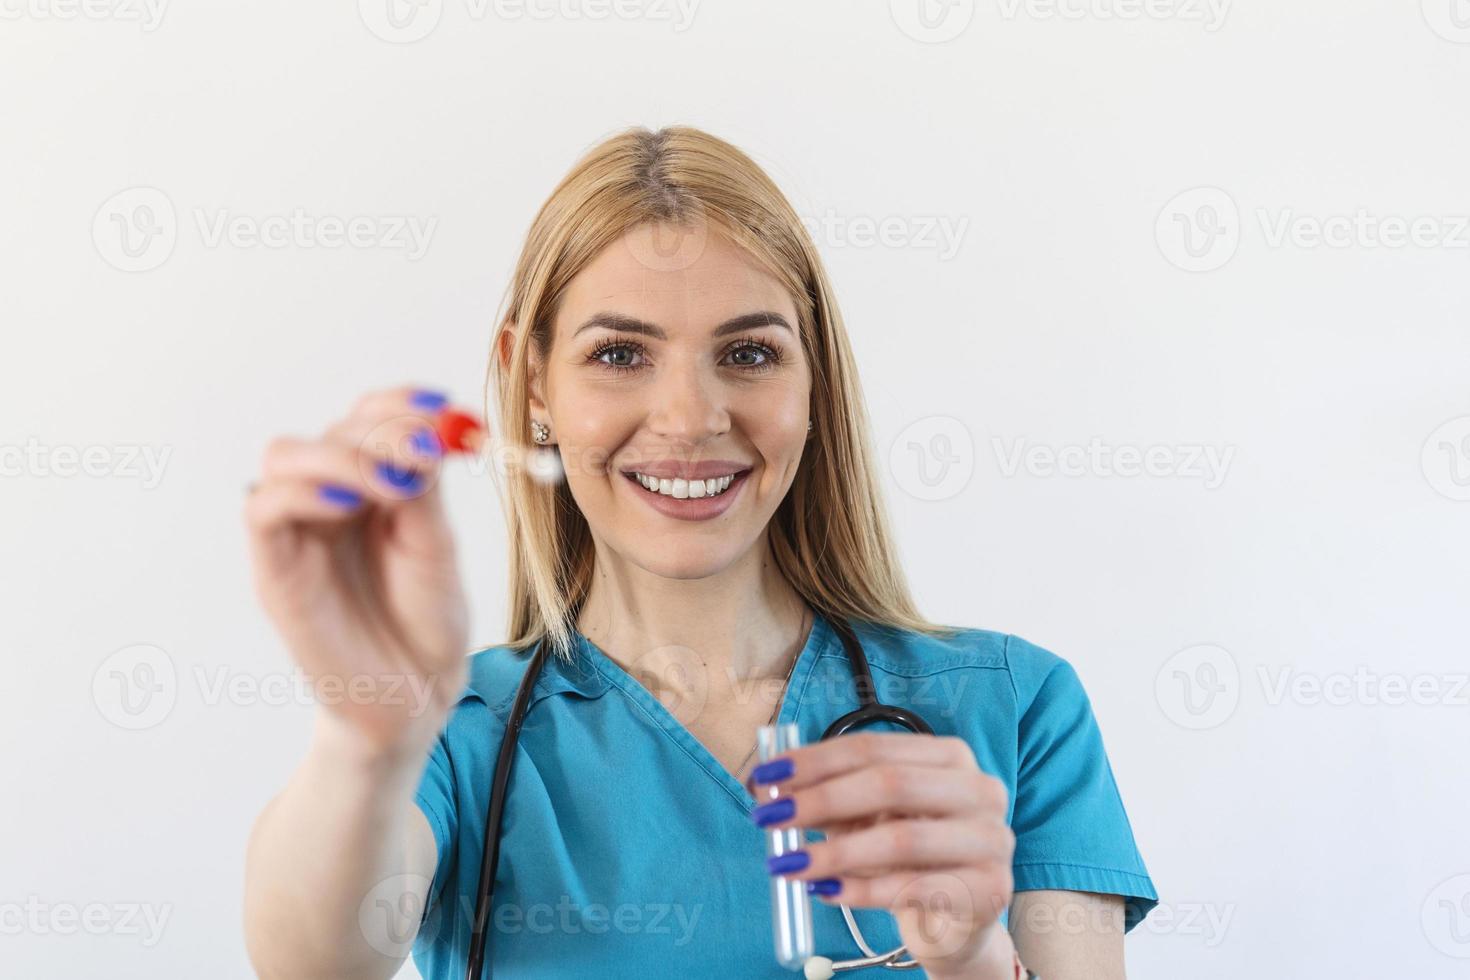 Medical healthcare holding COVID-19 , Coronavirus swab collection kit, wearing protective gloves, test tube for taking OP NP patient specimen sample,PCR DNA testing protocol process photo